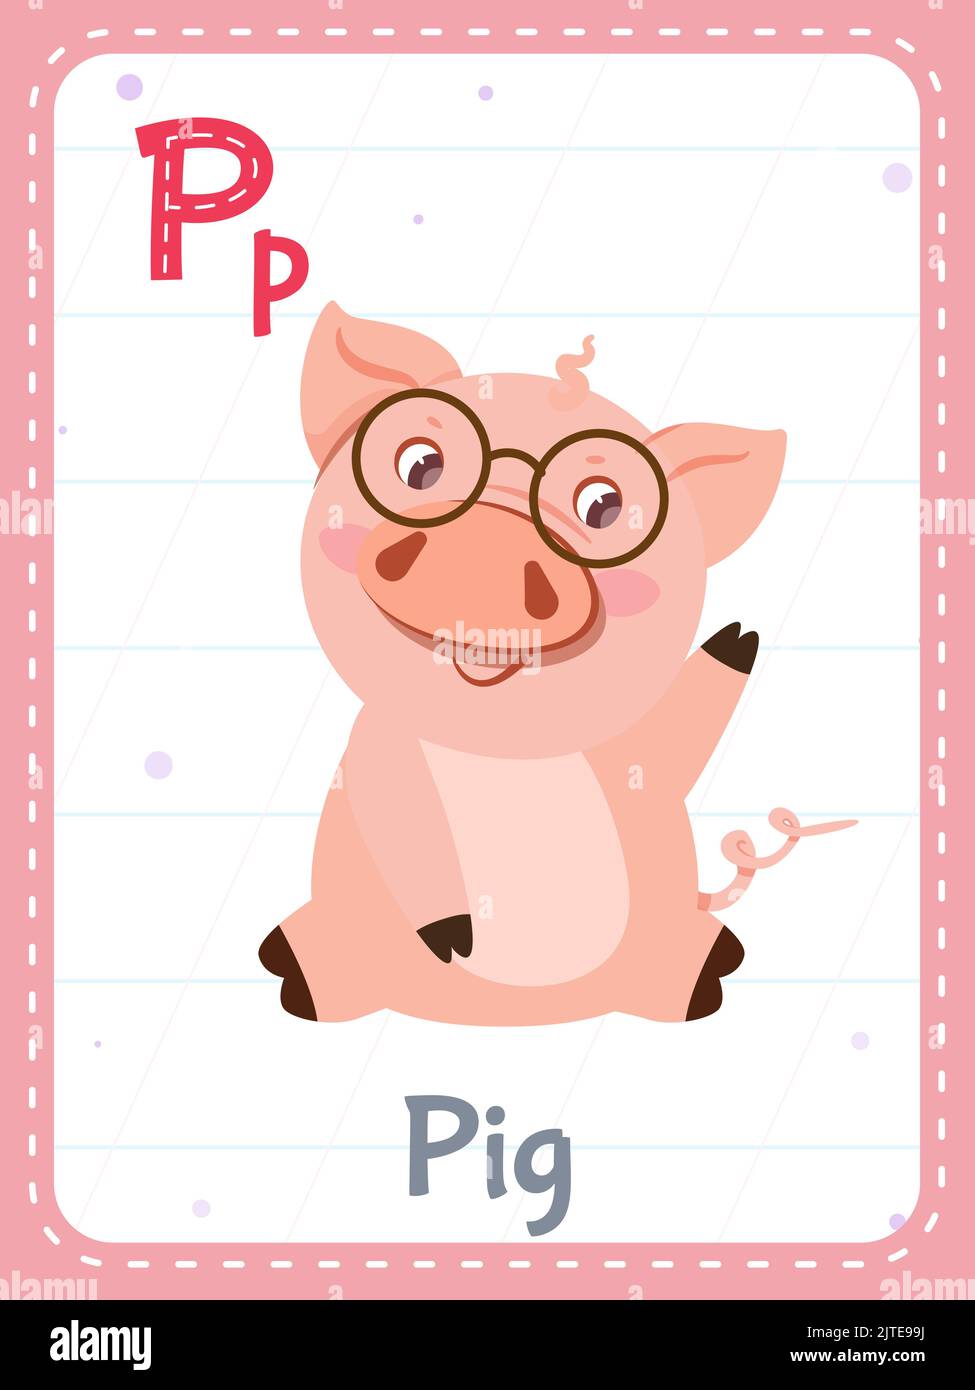 Alphabet printable flashcard with letter P. Cartoon cute pink pig animal and english word on flash card for children education. School memory card for kindergarten kids flat vector illustration. Stock Vector